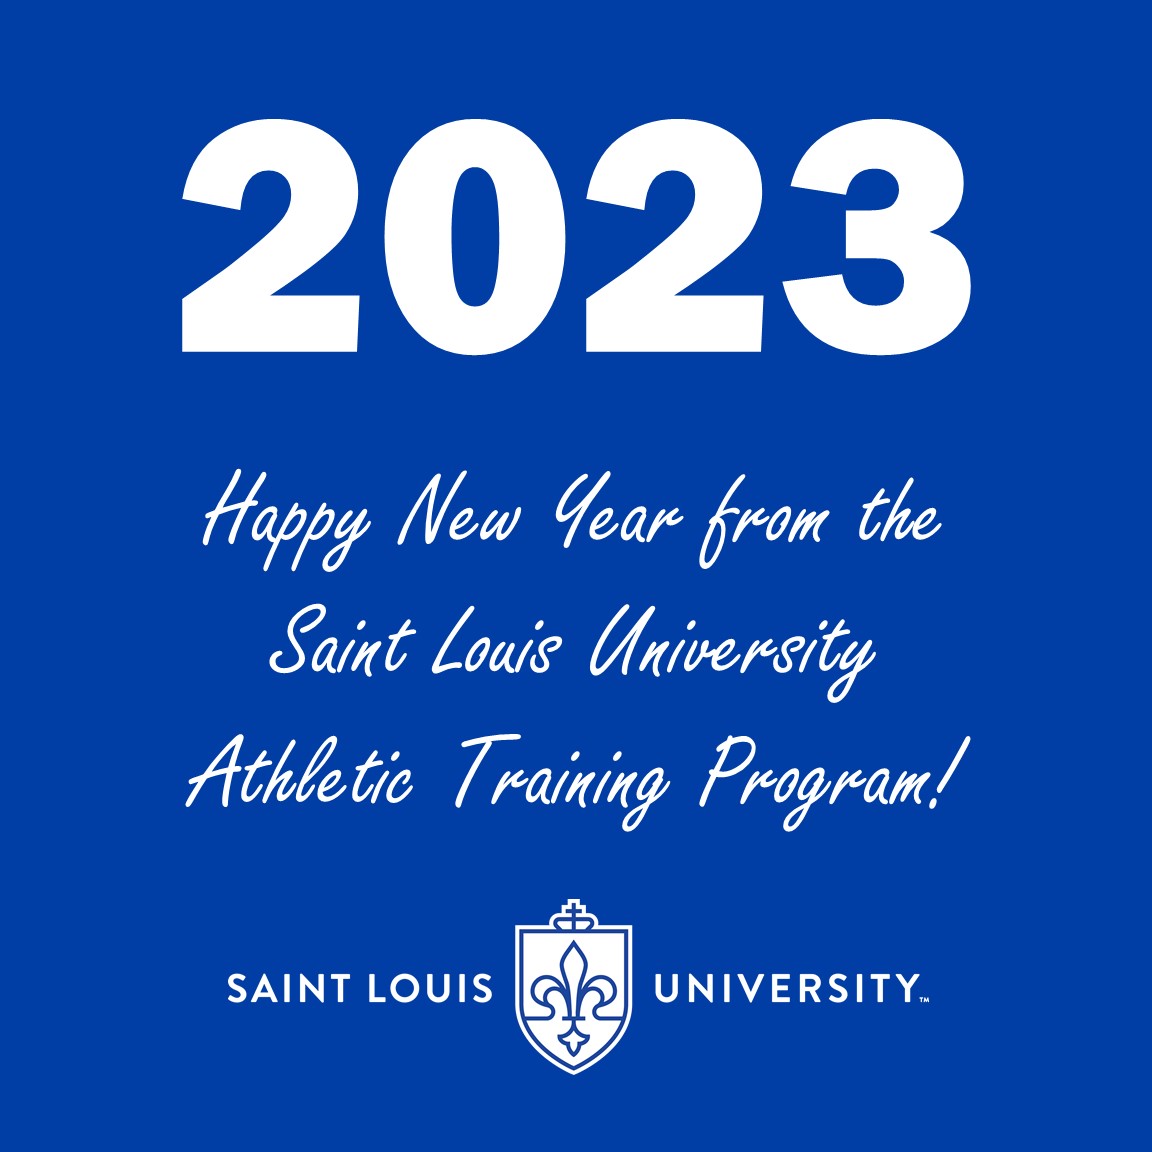 The faculty, staff and students of the Saint Louis University Athletic Training Program wish you a happy and successful New Year!  
It's great to be a Billiken!
#DCHSlife #OneSLU
@SLU_AT_Society @SLU_Billikens @SLU_Official @aSaferApproach @wfatt @NATA1950 @MOATA1984 @MAATAD5